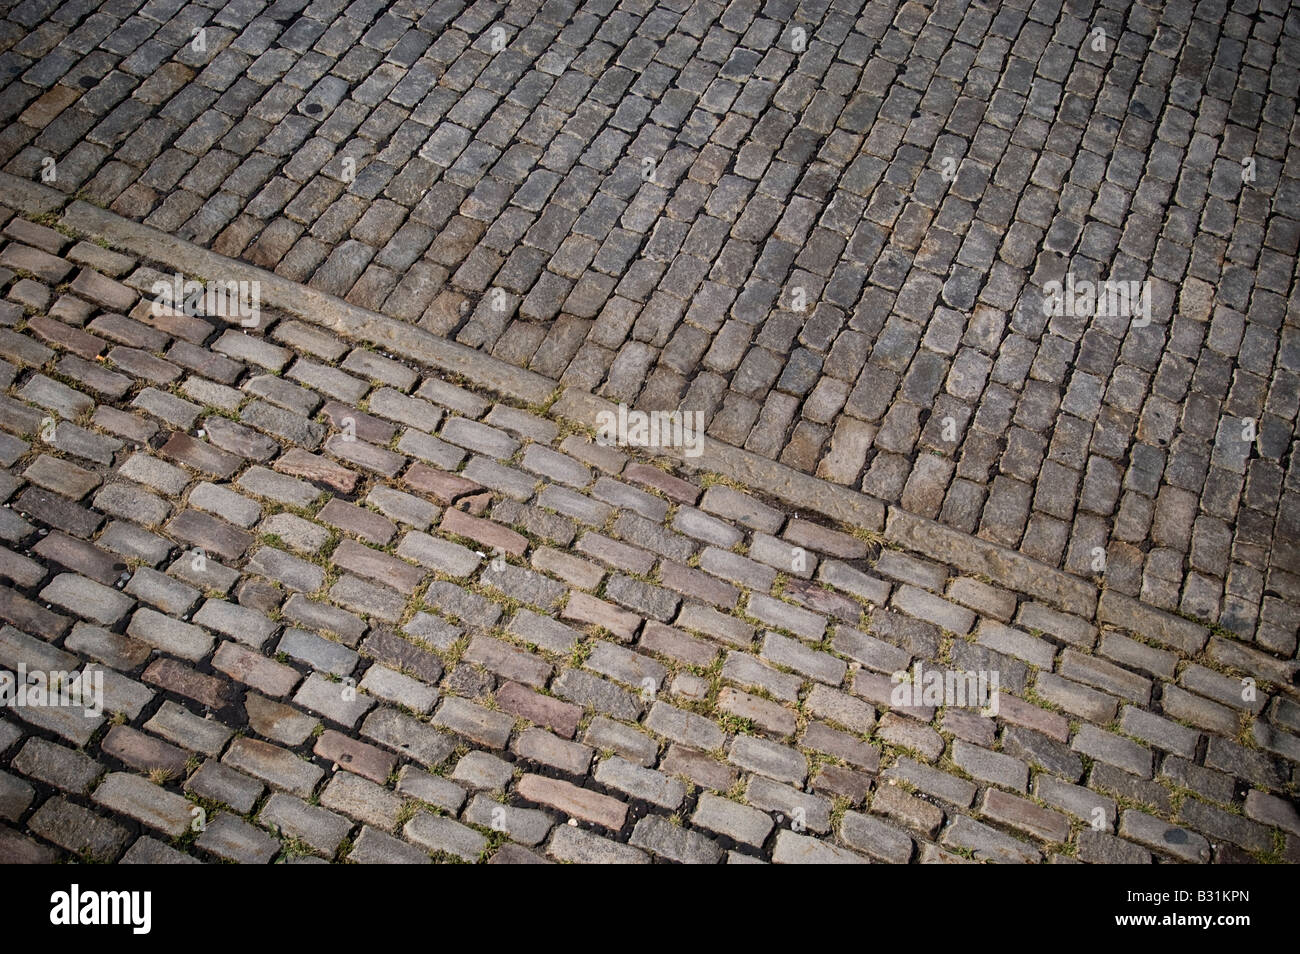 A detail of a street in Lower Manhattan in New York paved with Belgian Blocks Stock Photo